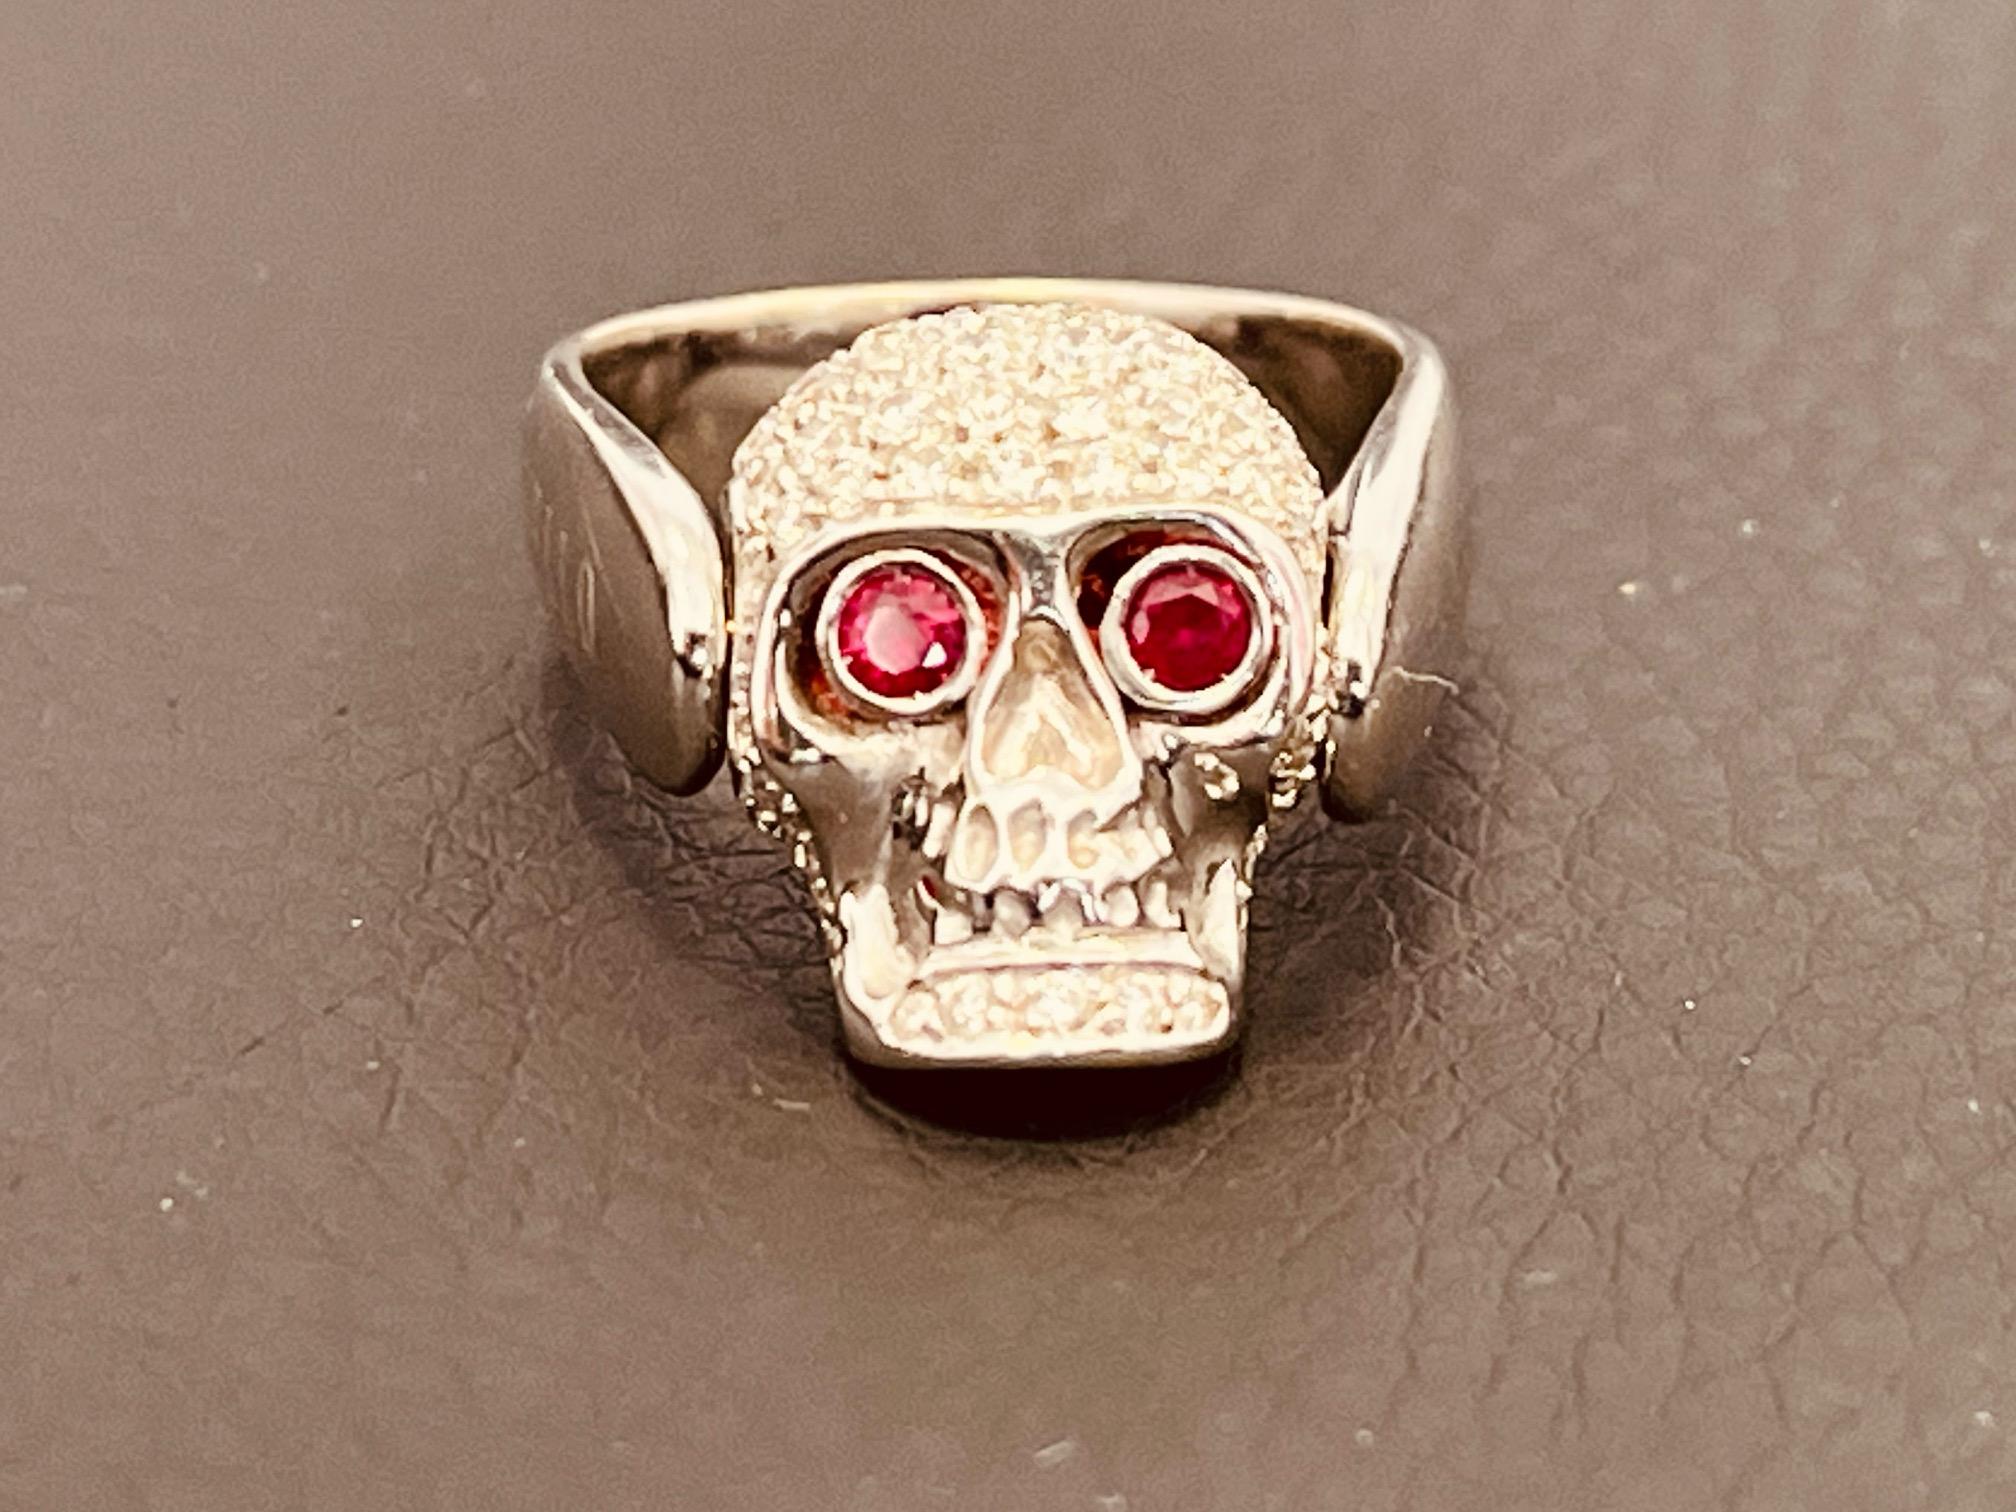 Gavello 18 Carat White Gold and 0.7 Carat Diamond Skull Ring with Ruby Eyes For Sale 4